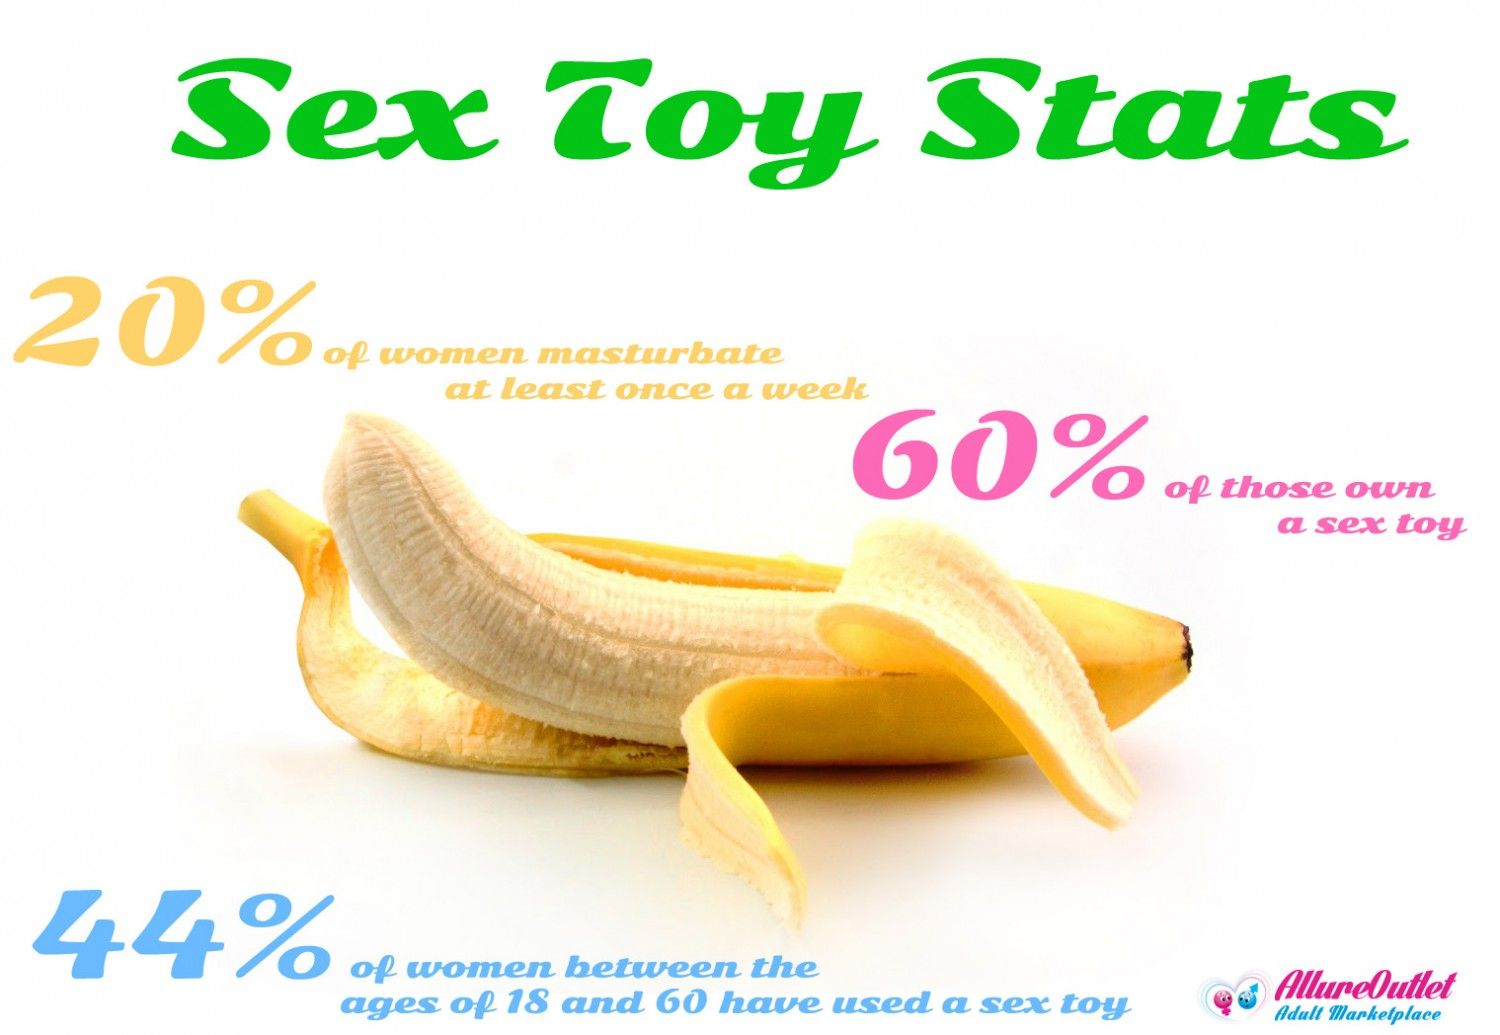 Homemade sex toys being used